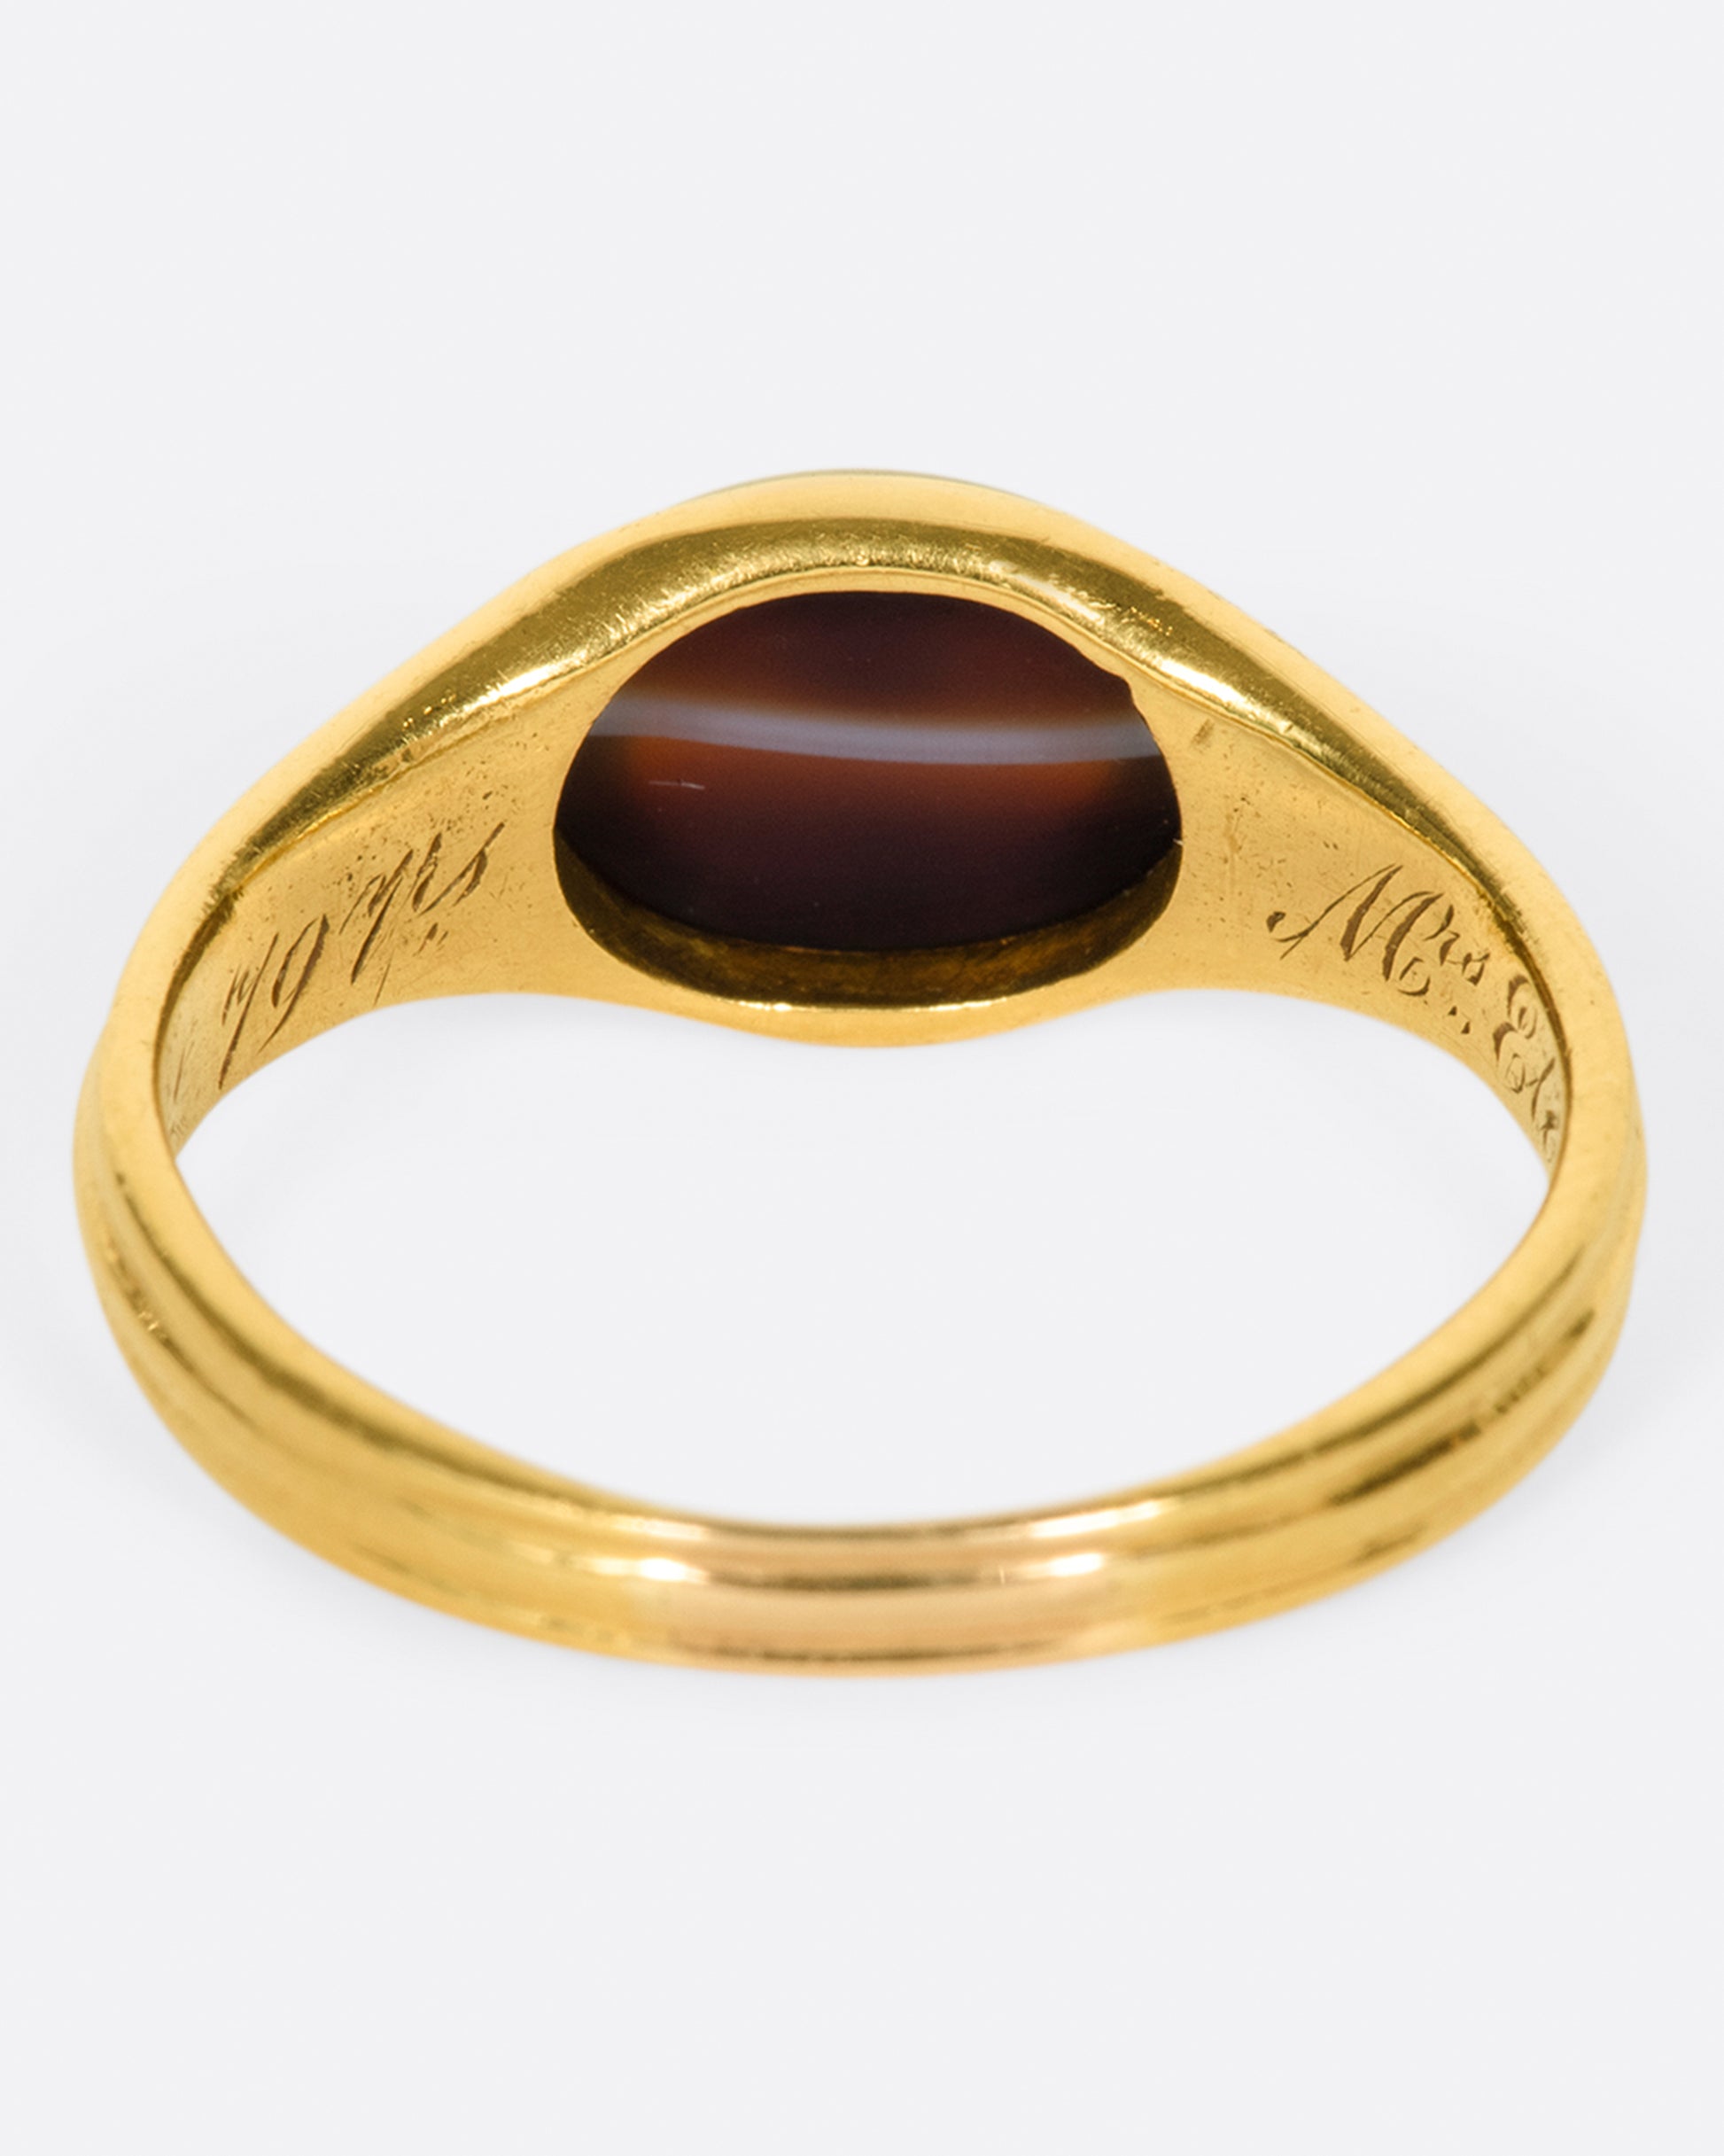 A vintage gold signet ring with a banded deep red oval agate at its center.